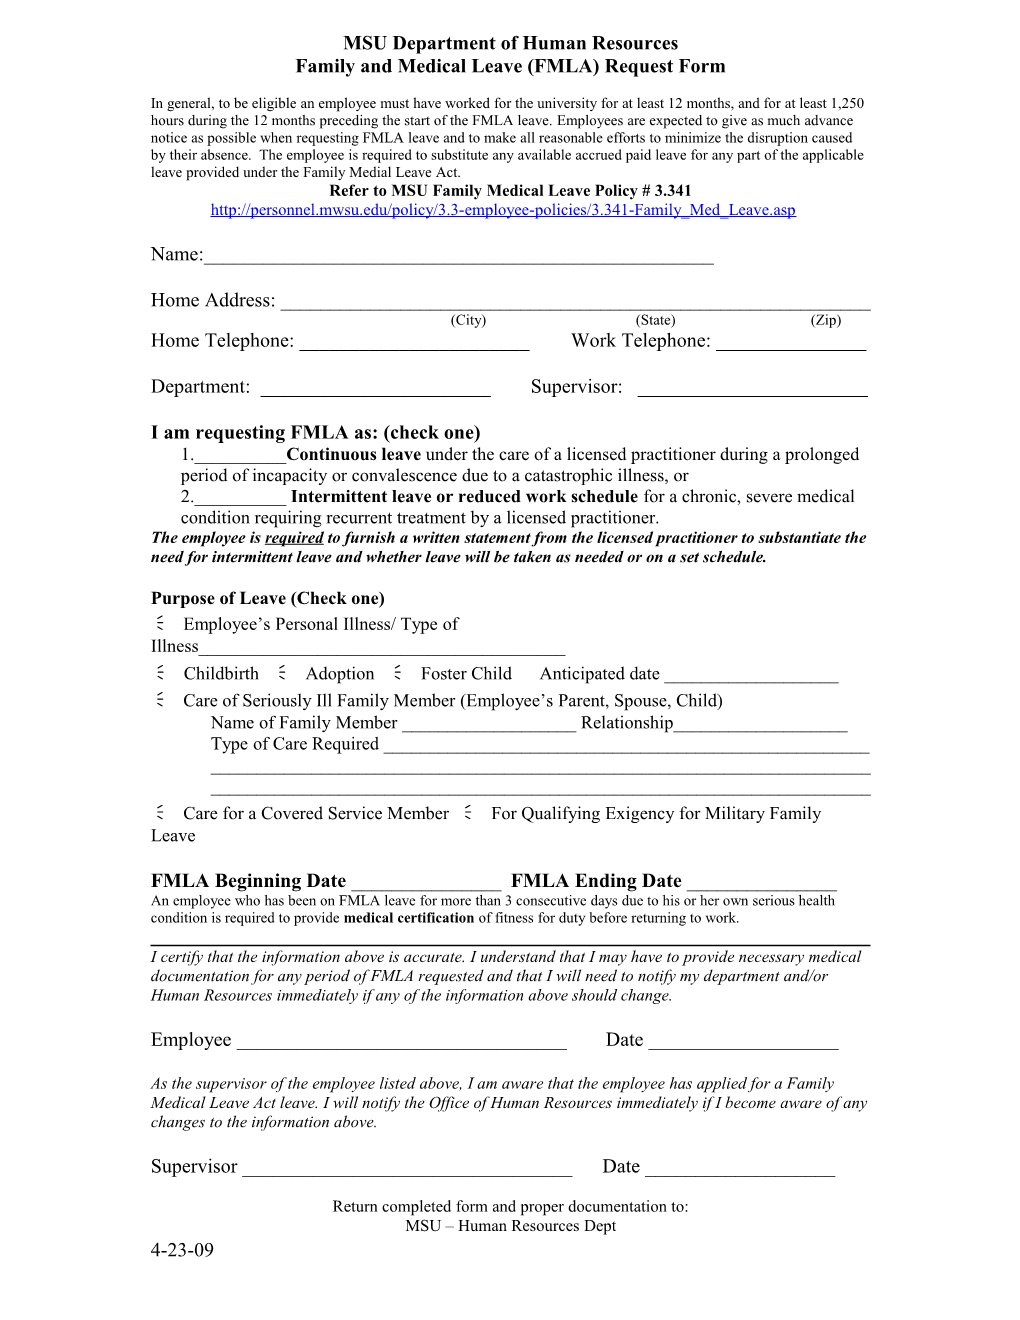 Family and Medical Leave (FMLA) Request Form